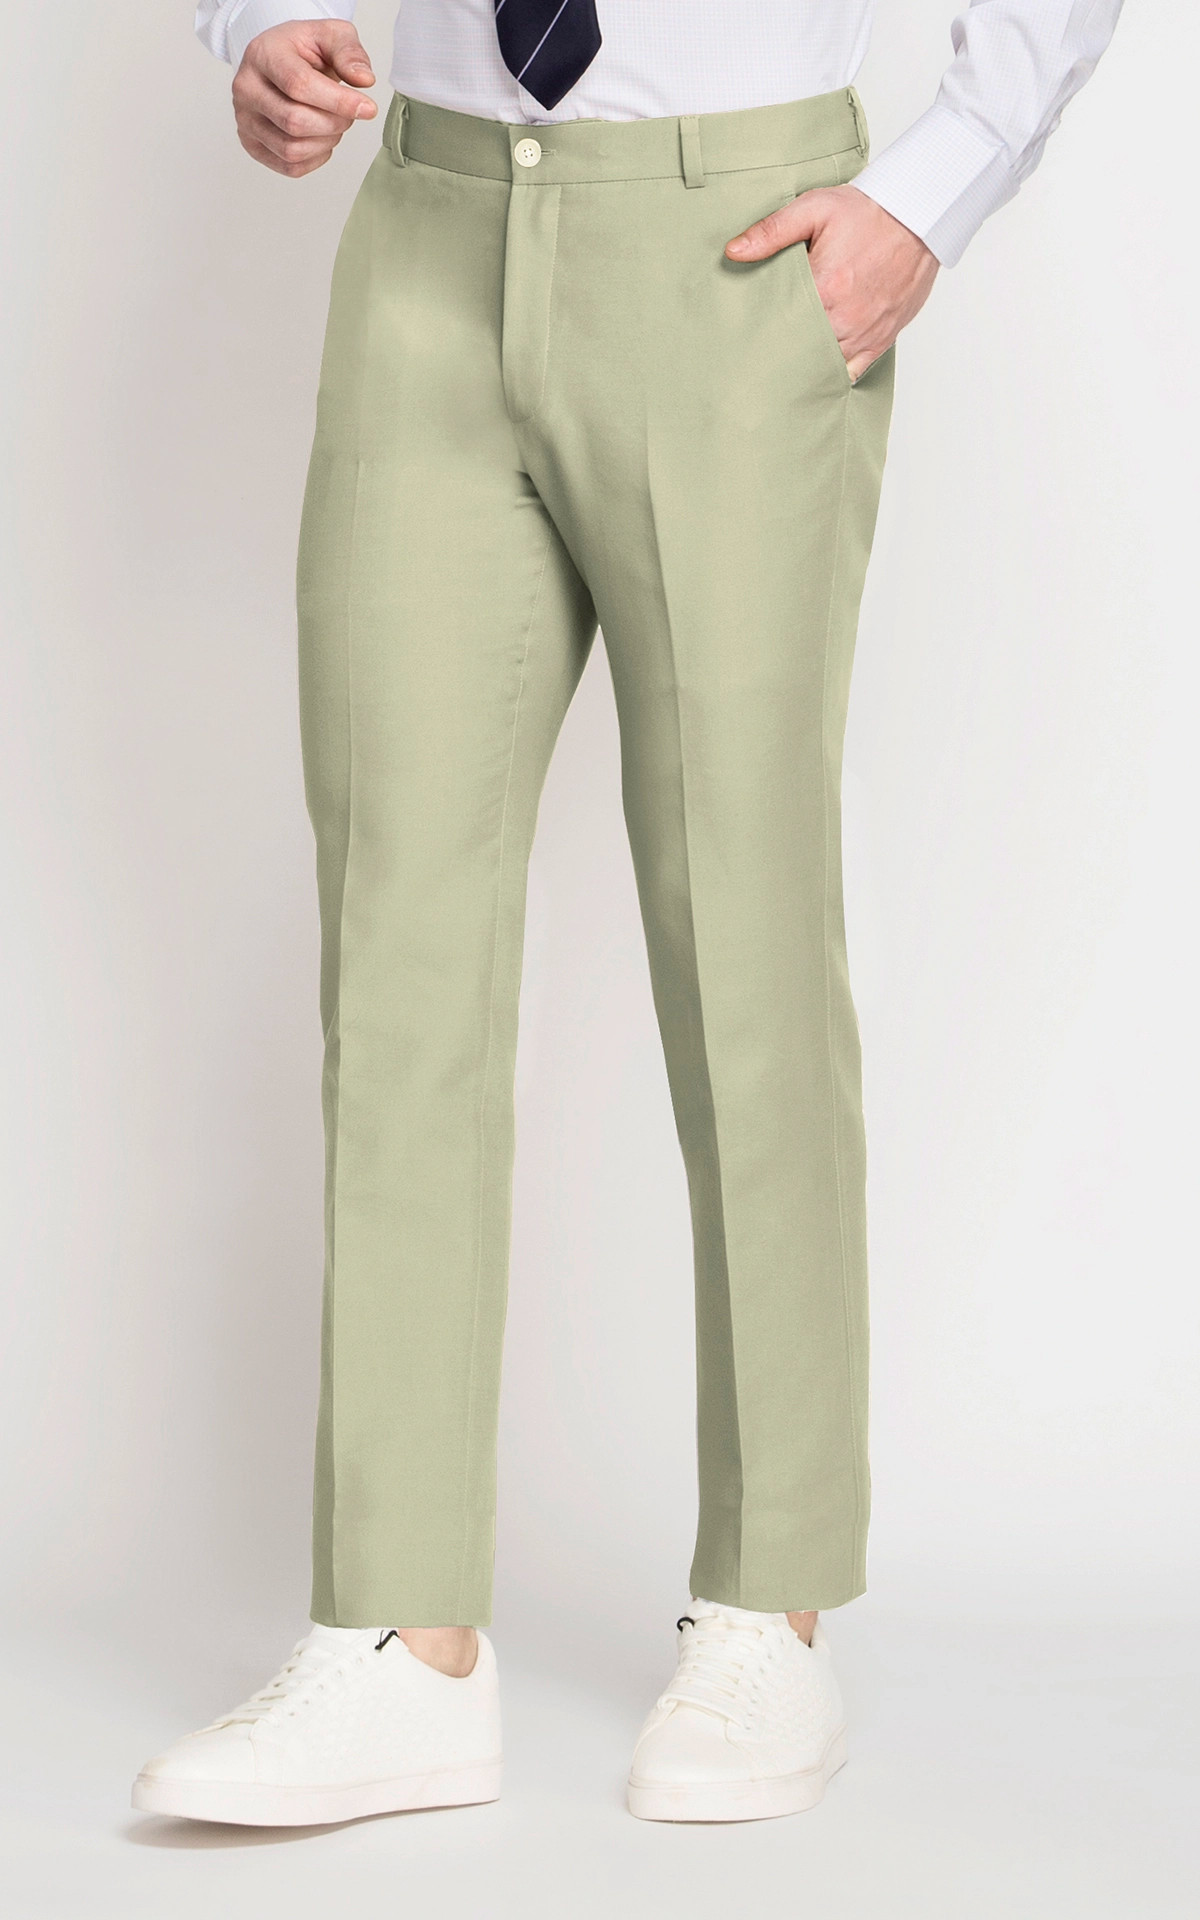 Tailored & Formal trousers Brioni - Cotton formal trousers - RPLPZ04631